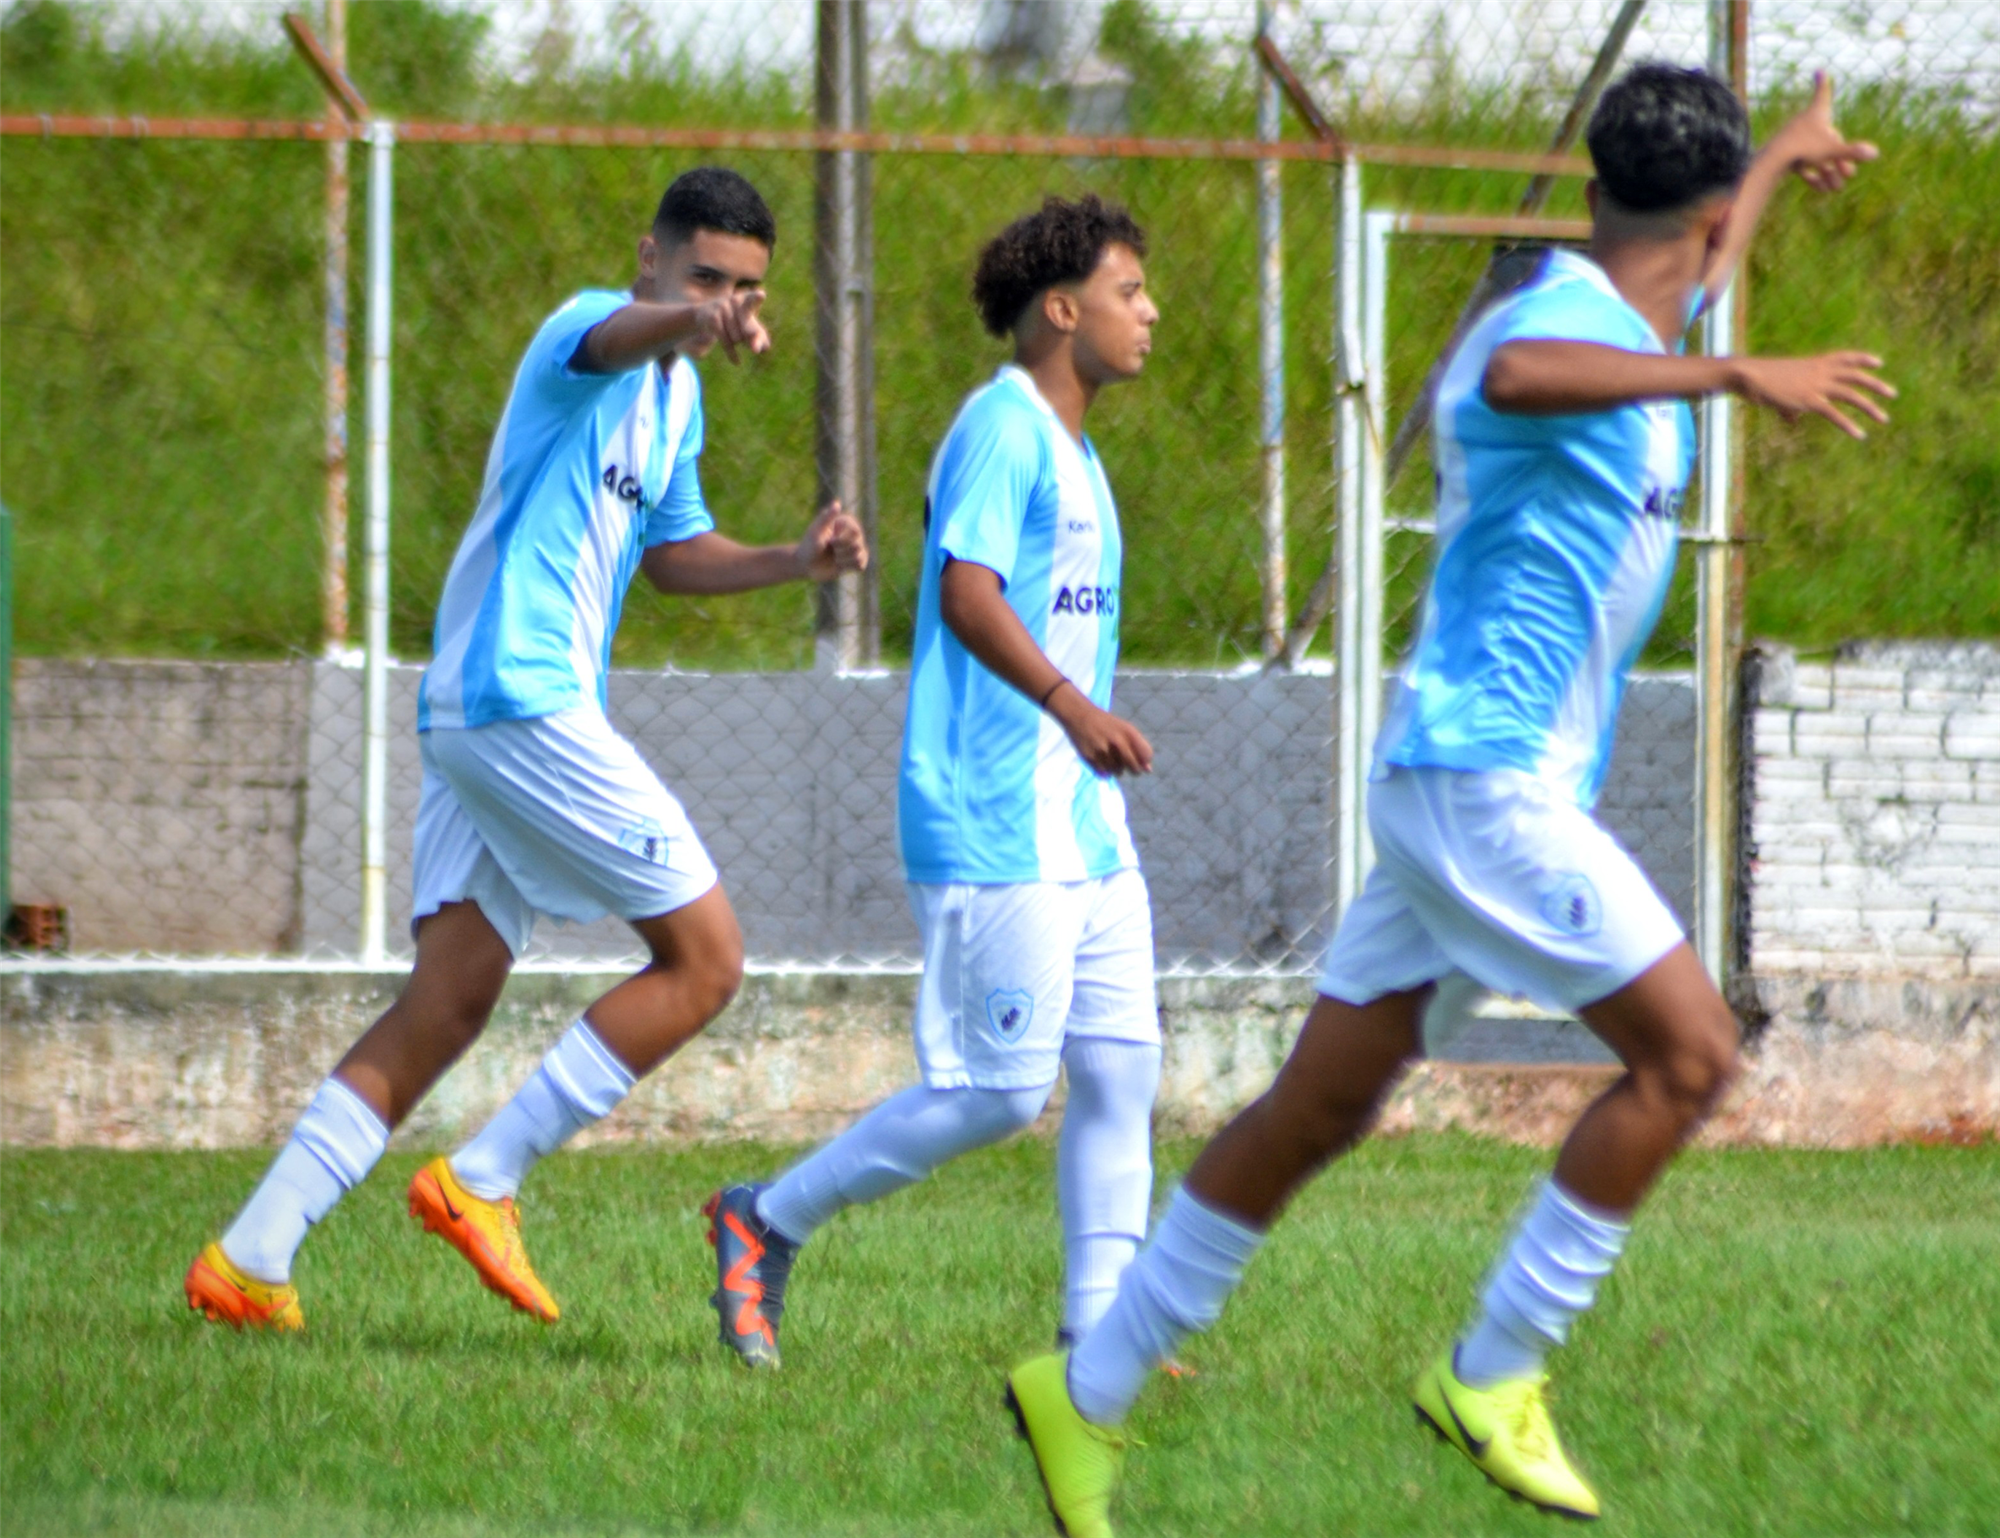 Londrina defeats undefeated Arapongas in the under-17 State Championship